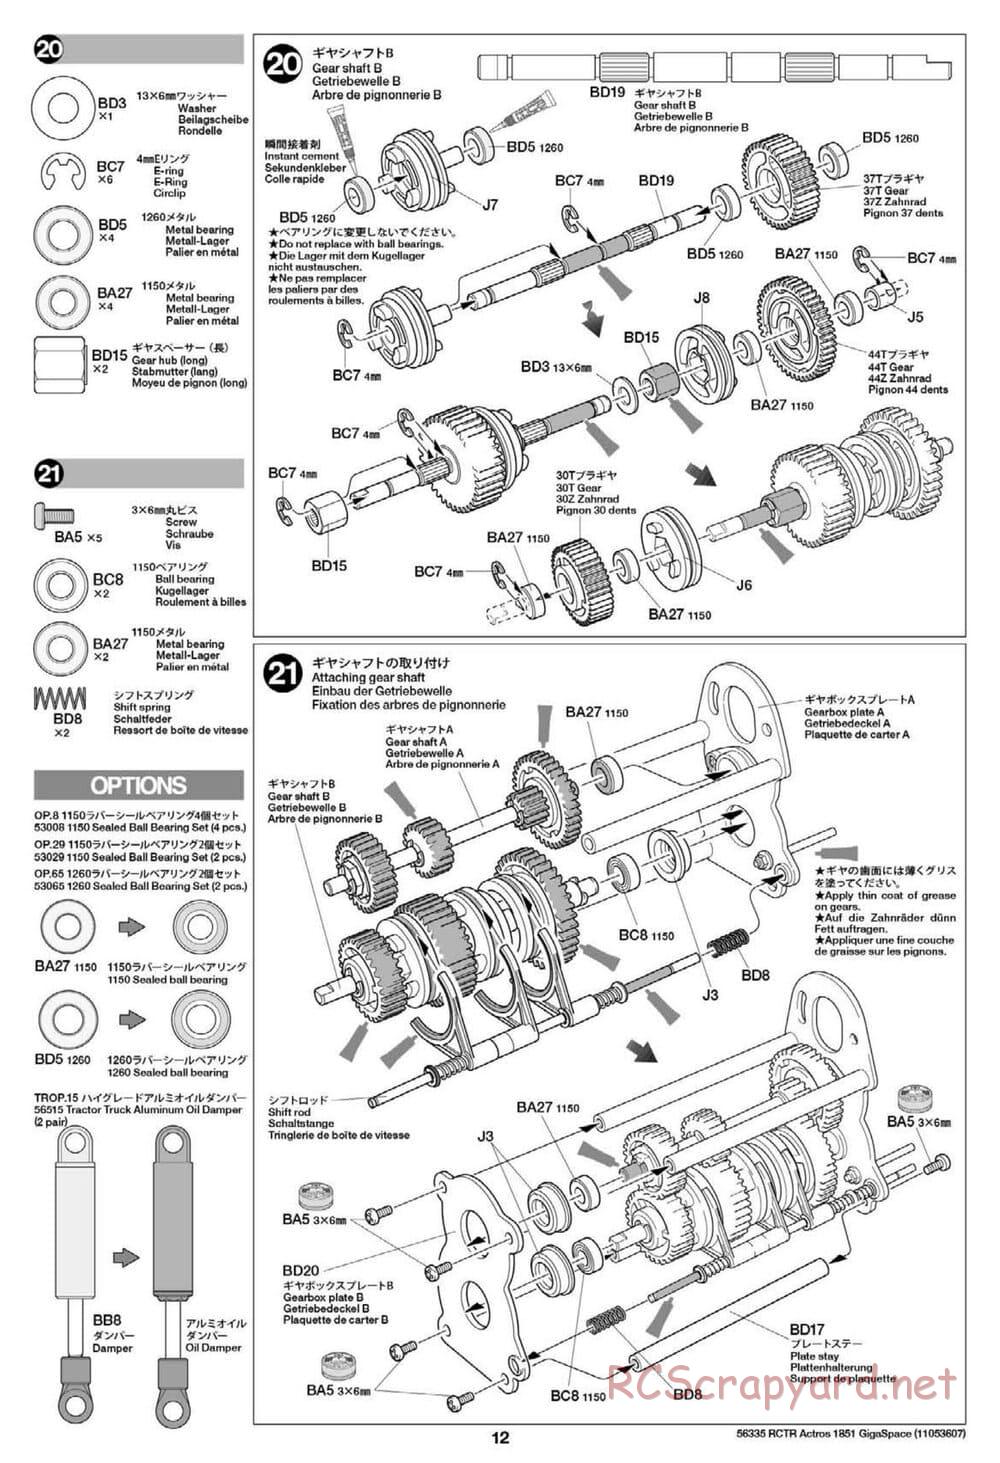 Tamiya - Mercedes-Benz Actros 1851 Gigaspace Tractor Truck Chassis - Manual - Page 12